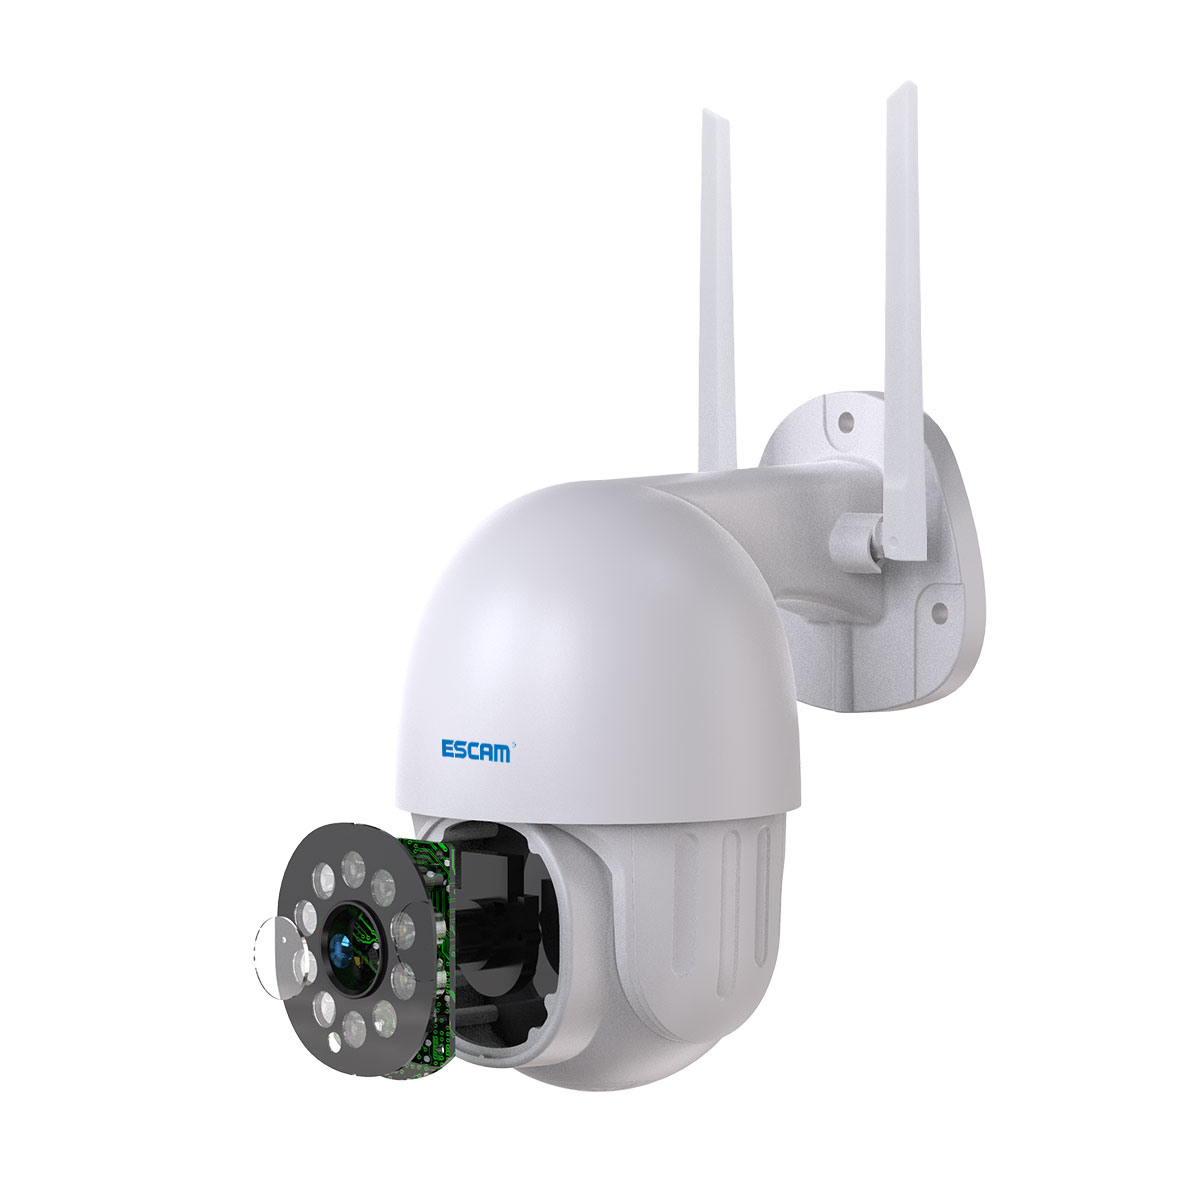 ESCAM-PT202-1080P-WiFi-IP-Camera-Infrared-Night-Vision-Waterproof-With-Motions-Detection-And-Automat-1784296-14